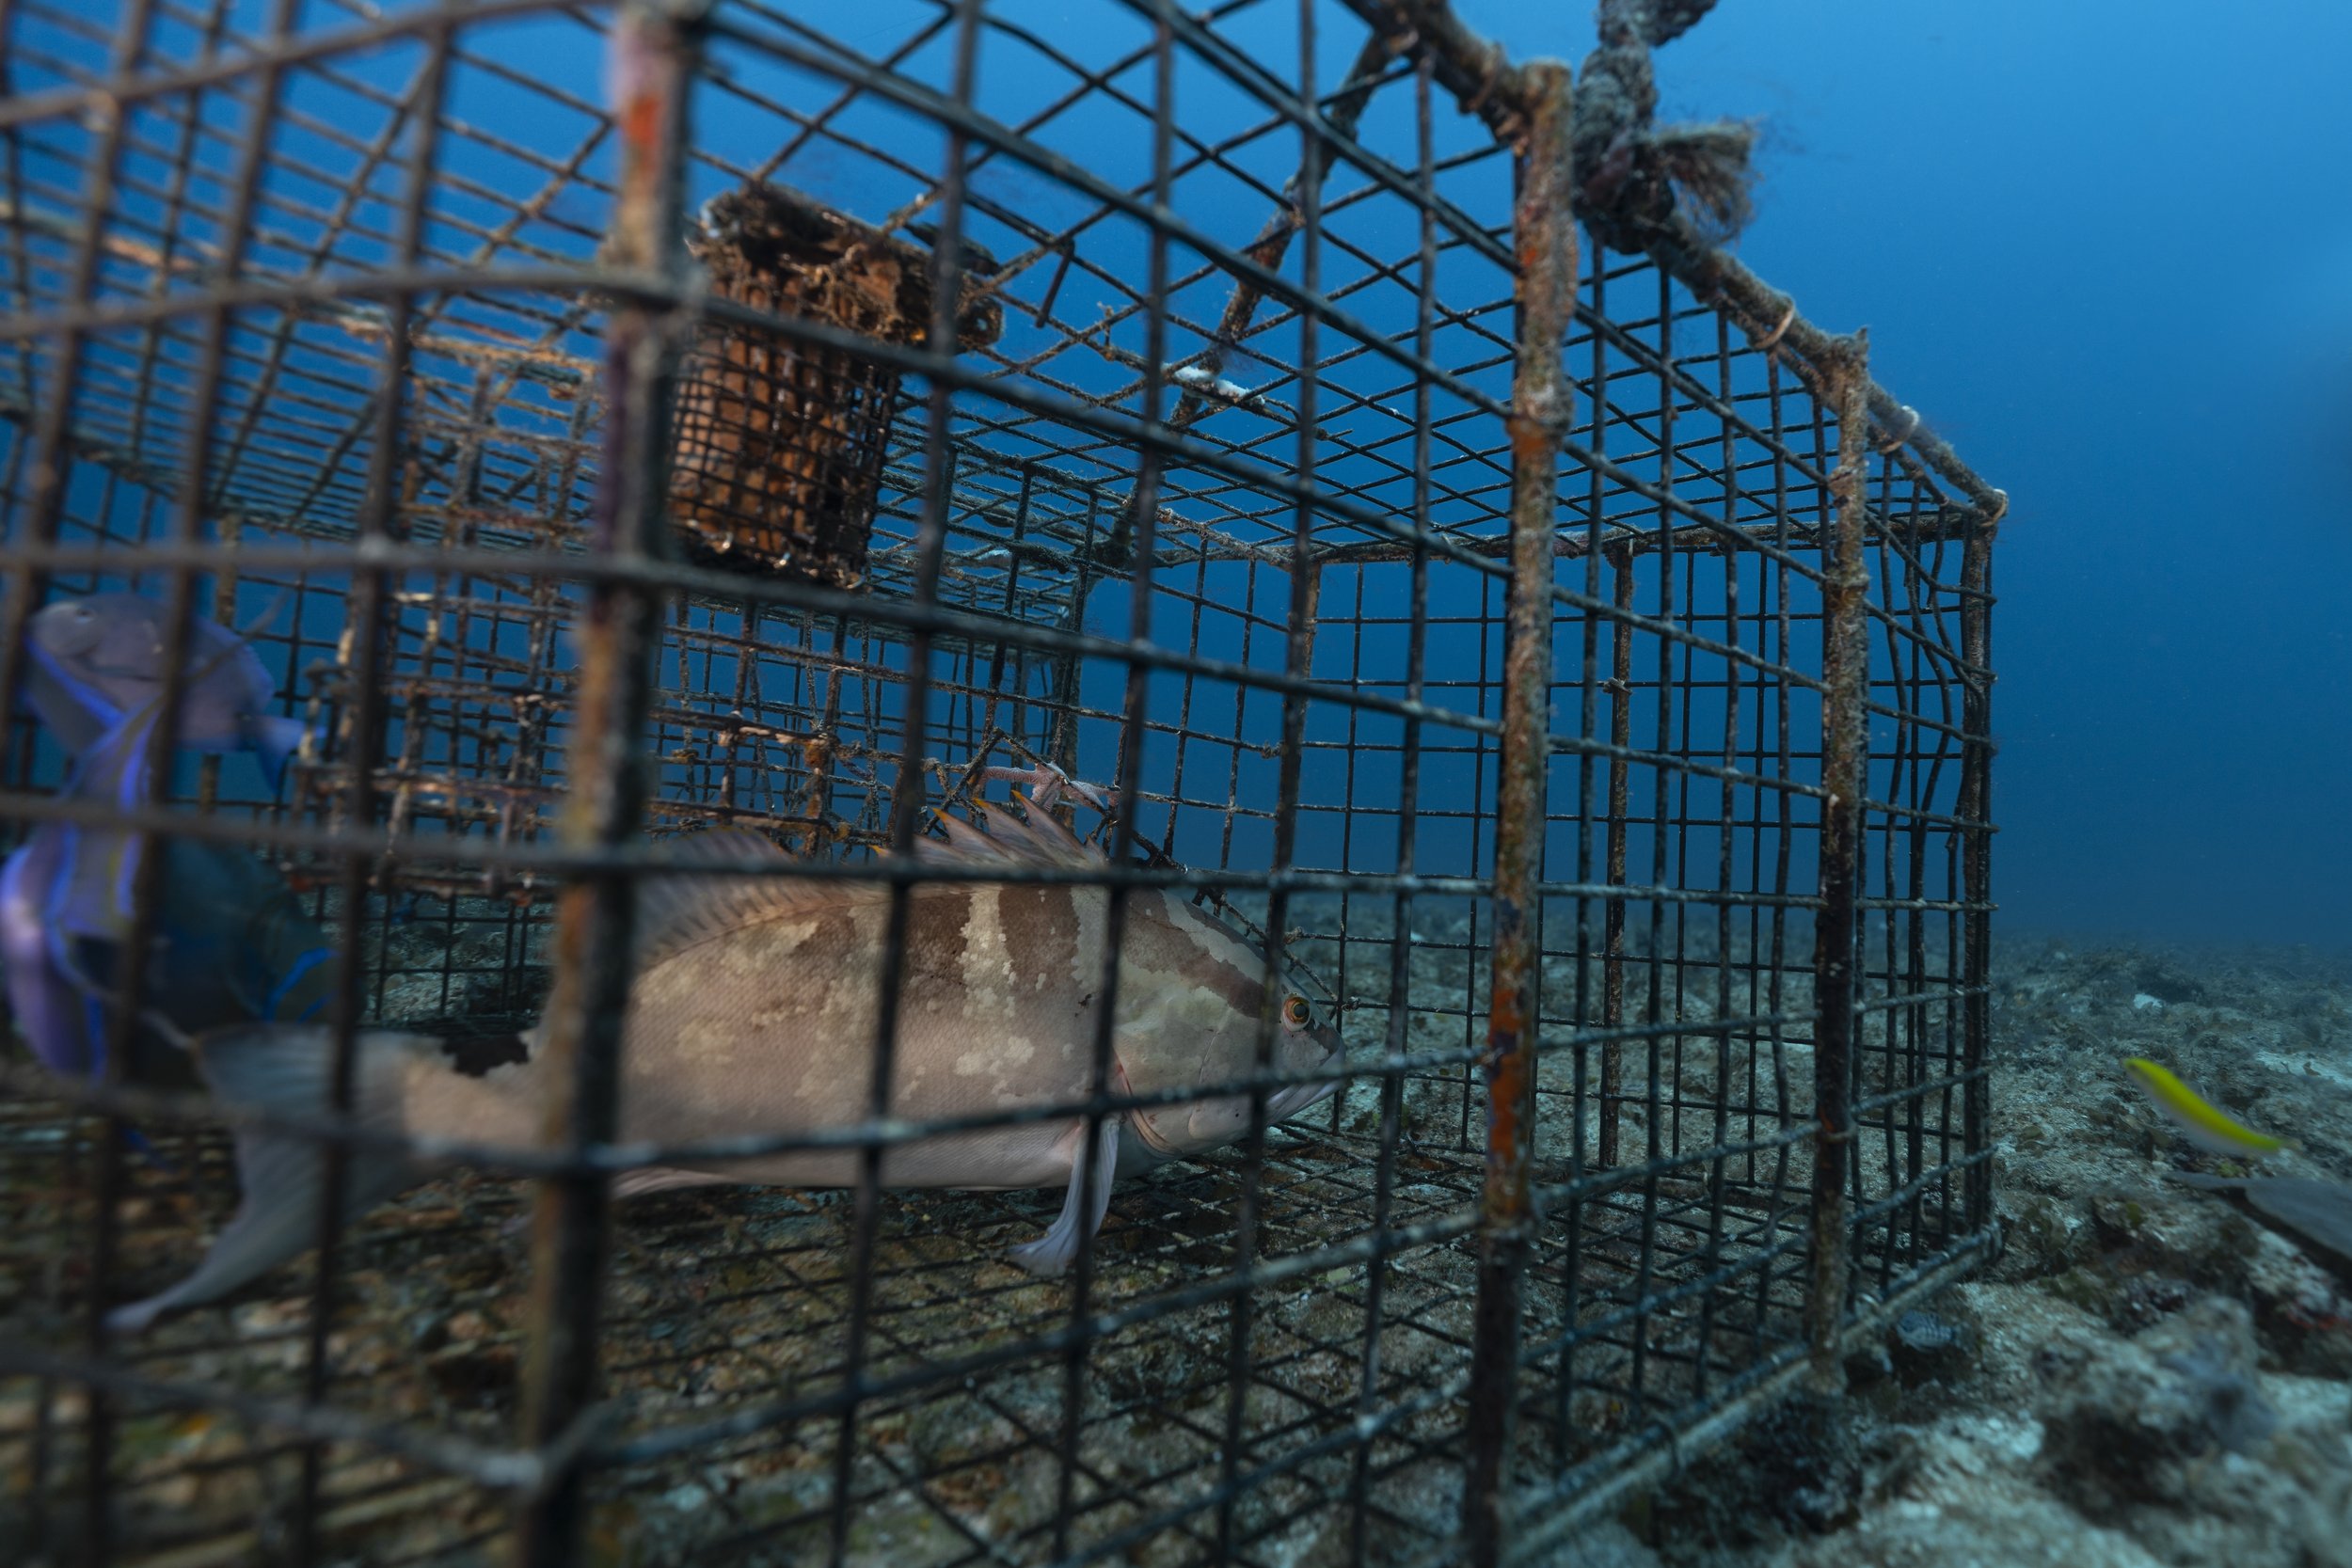  At the second trap, a federally protected Nassau Grouper is spotted within an illegally placed trap. 